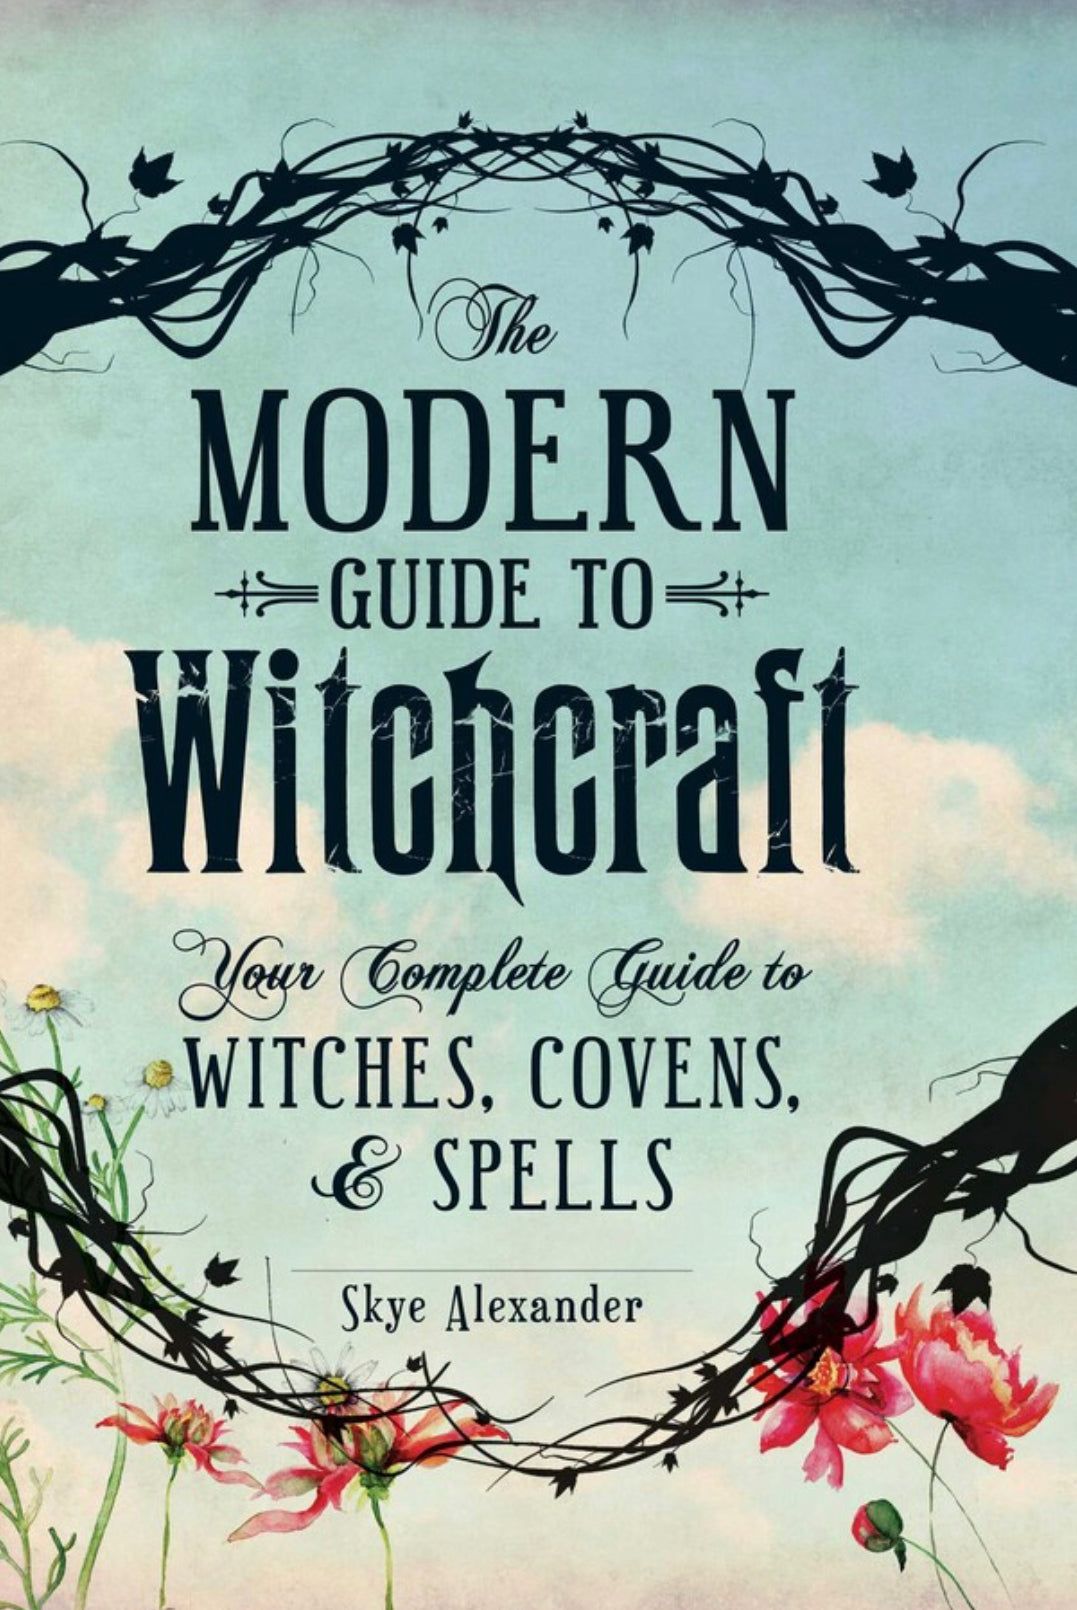 modern witchcraft guide to witchcraft by Skye Alexander